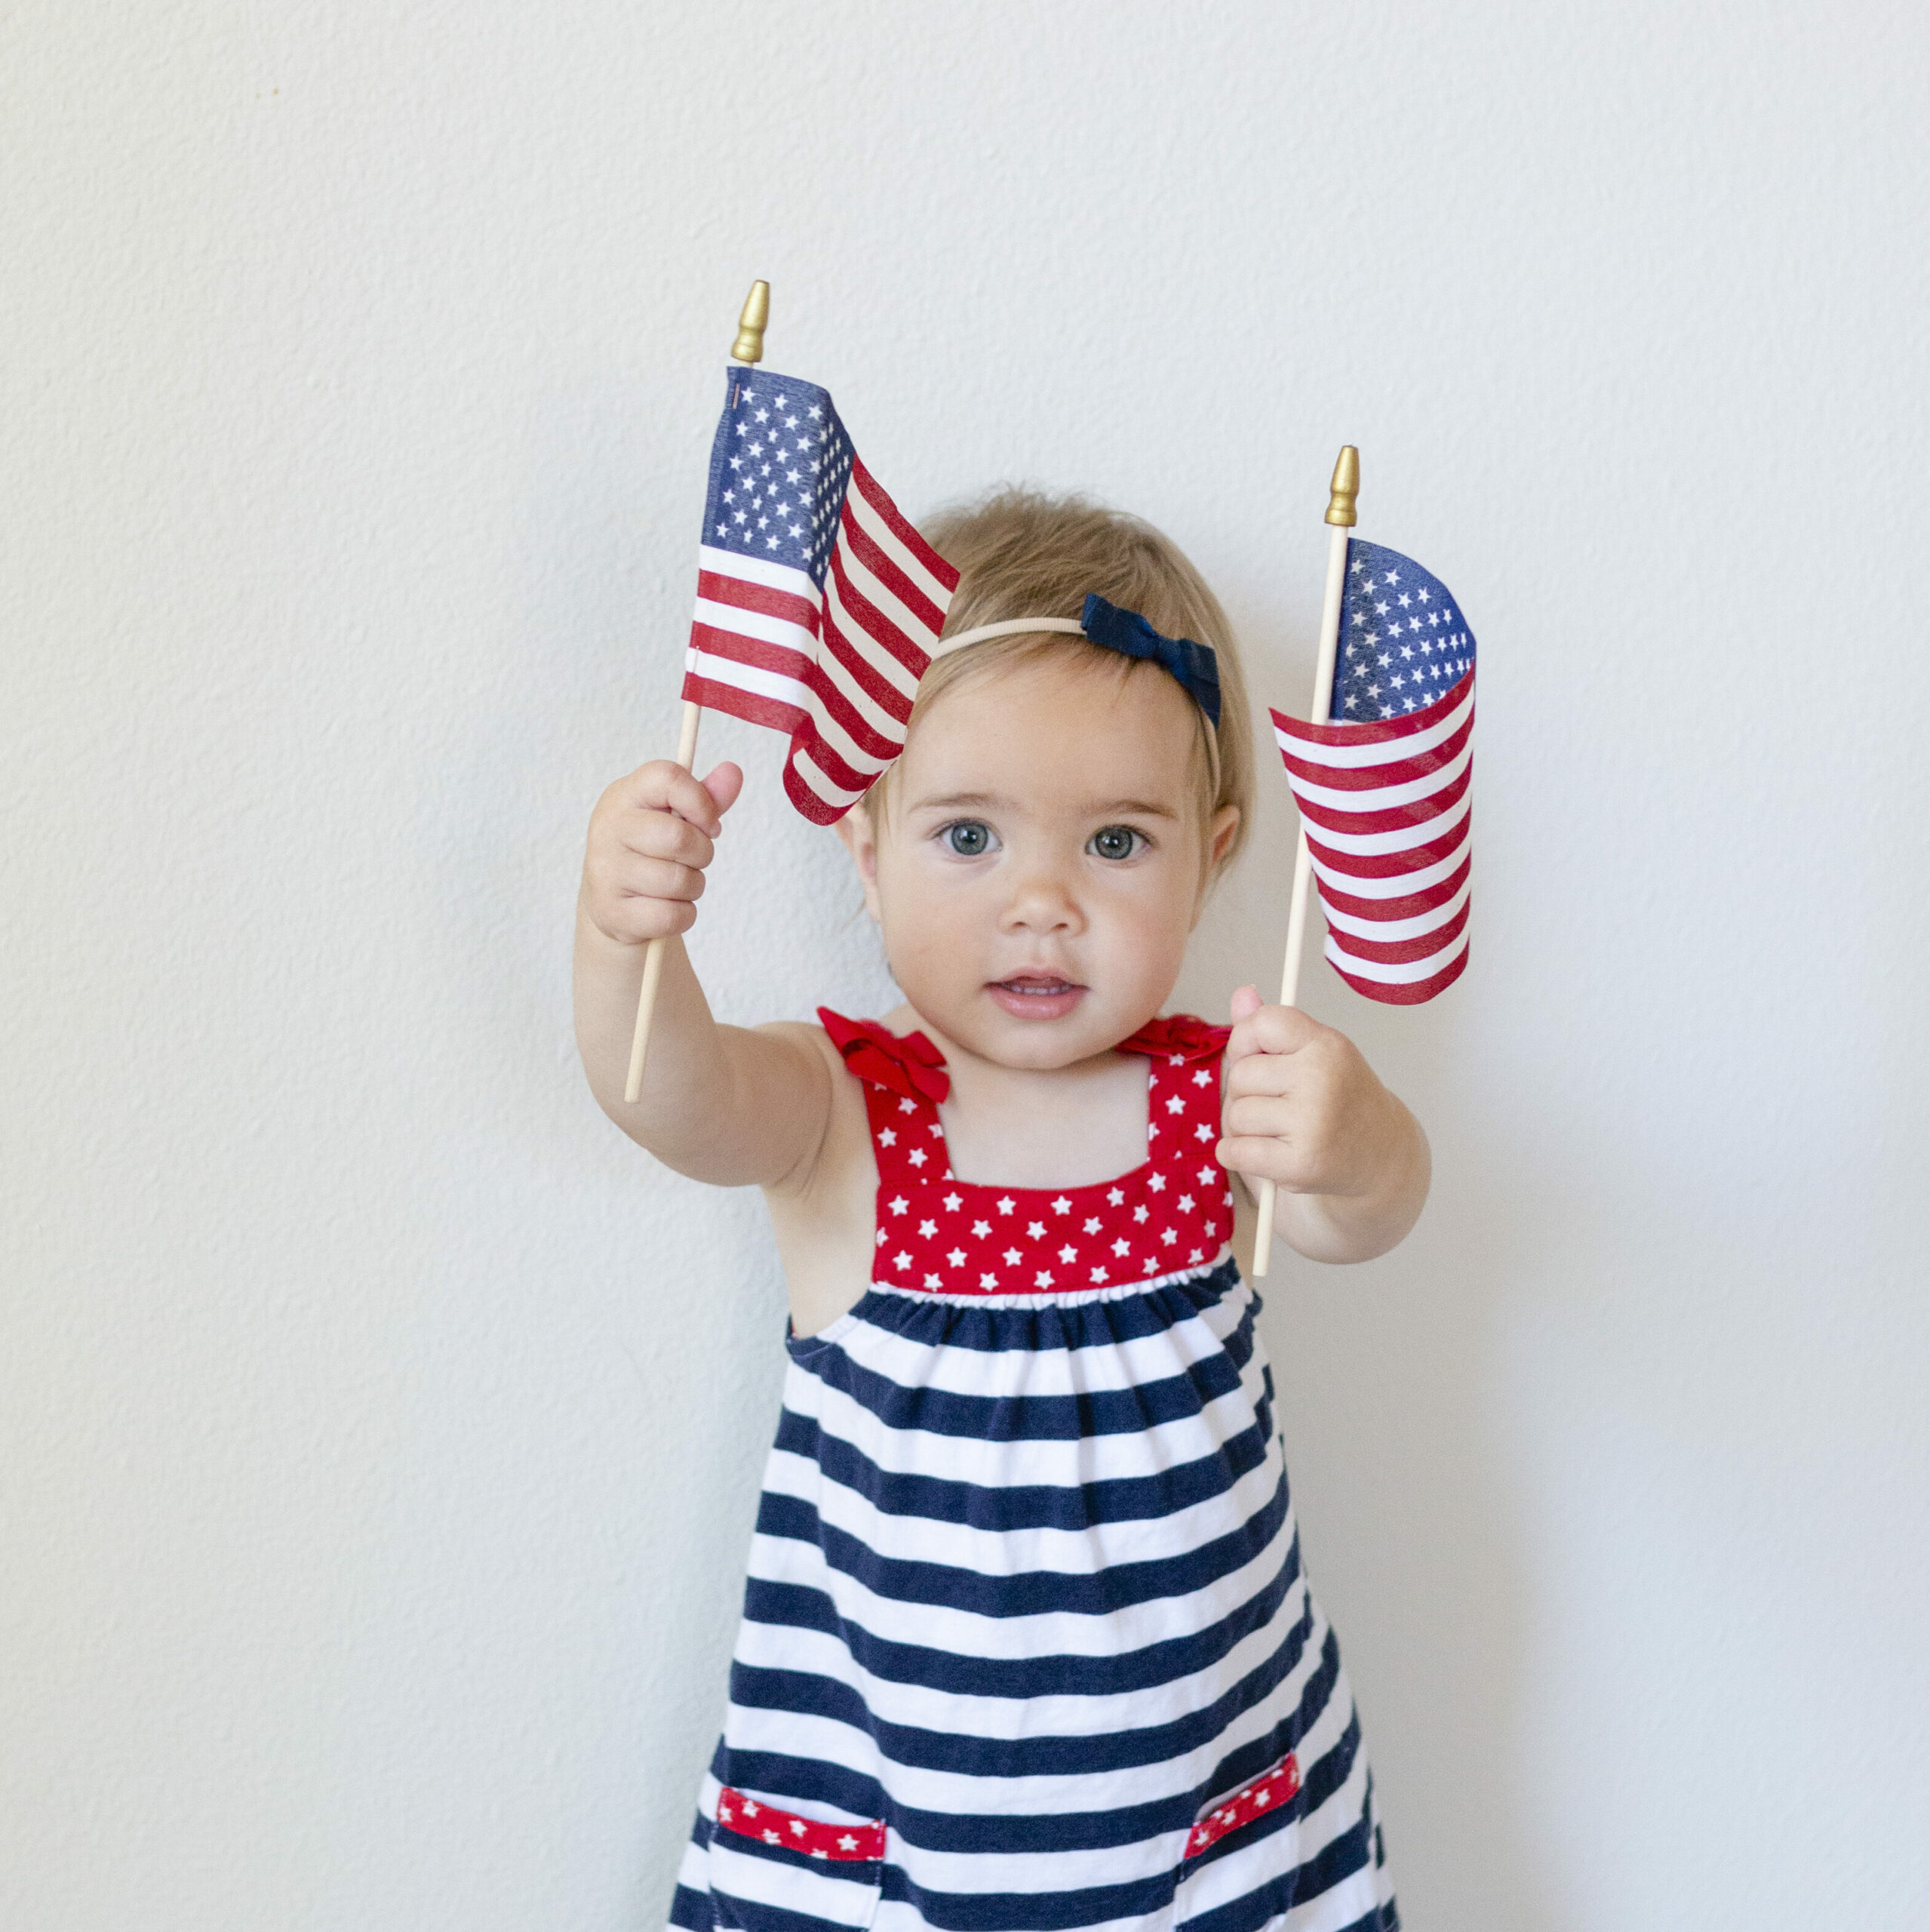 Toddler girl holding American flags